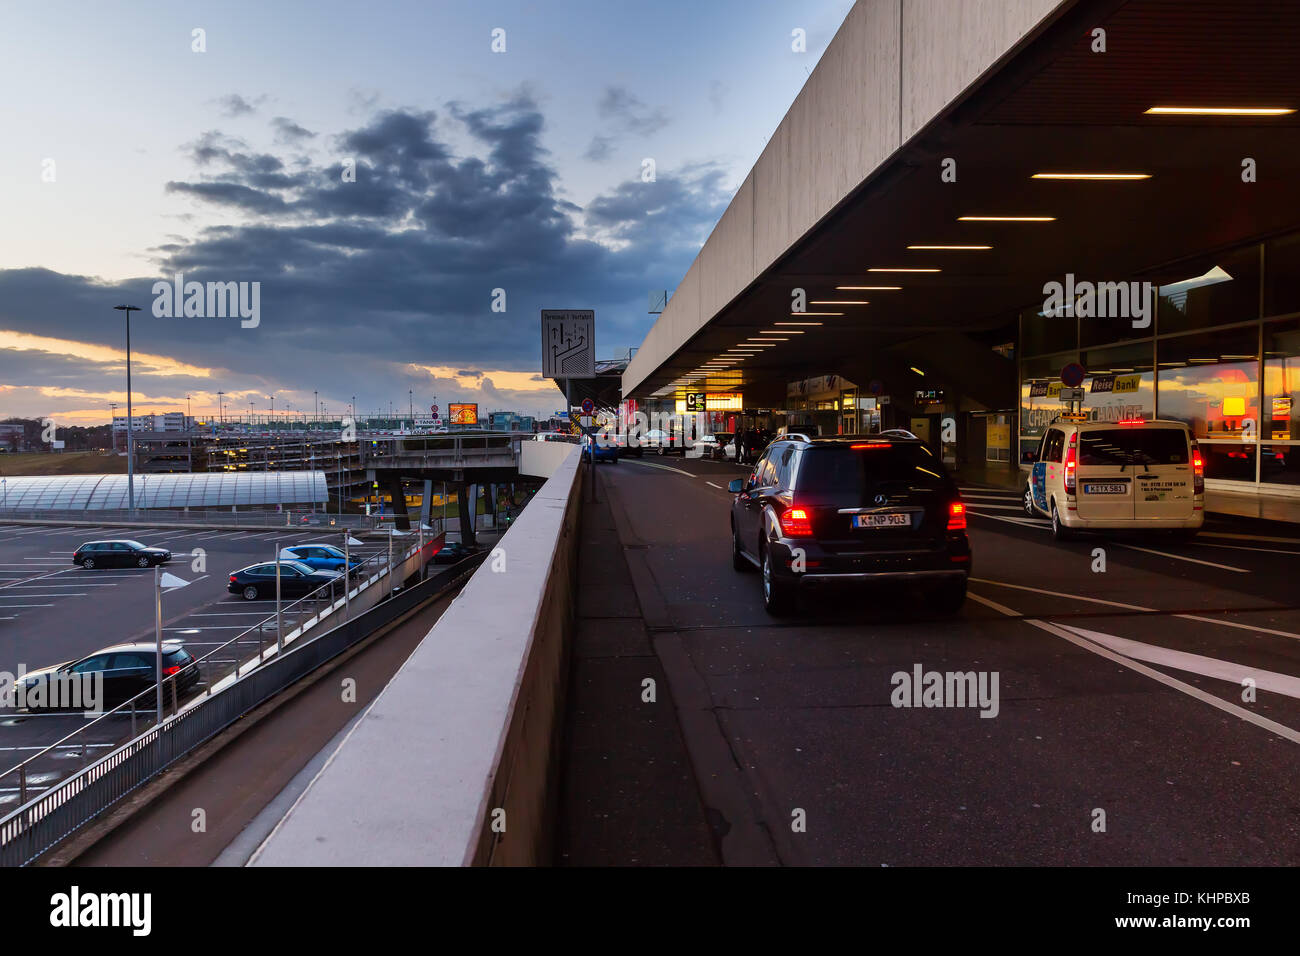 Cologne, Germany - February 24, 2017: sunset view of the Cologne Bonn Airport, that is the international airport of Germany's 4th-largest city Cologne Stock Photo